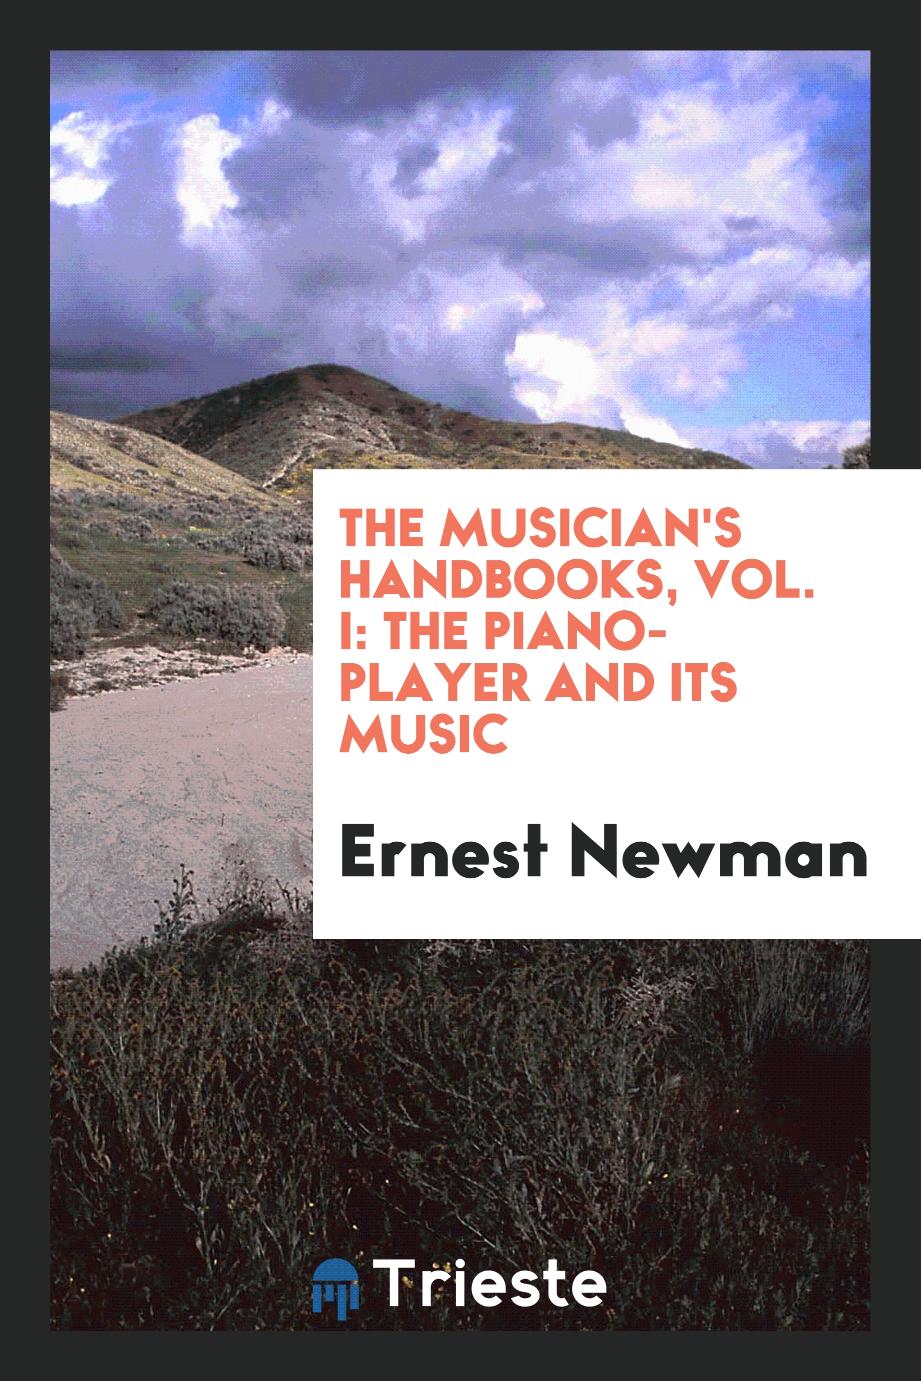 The Musician's handbooks, Vol. I: The piano-player and its music